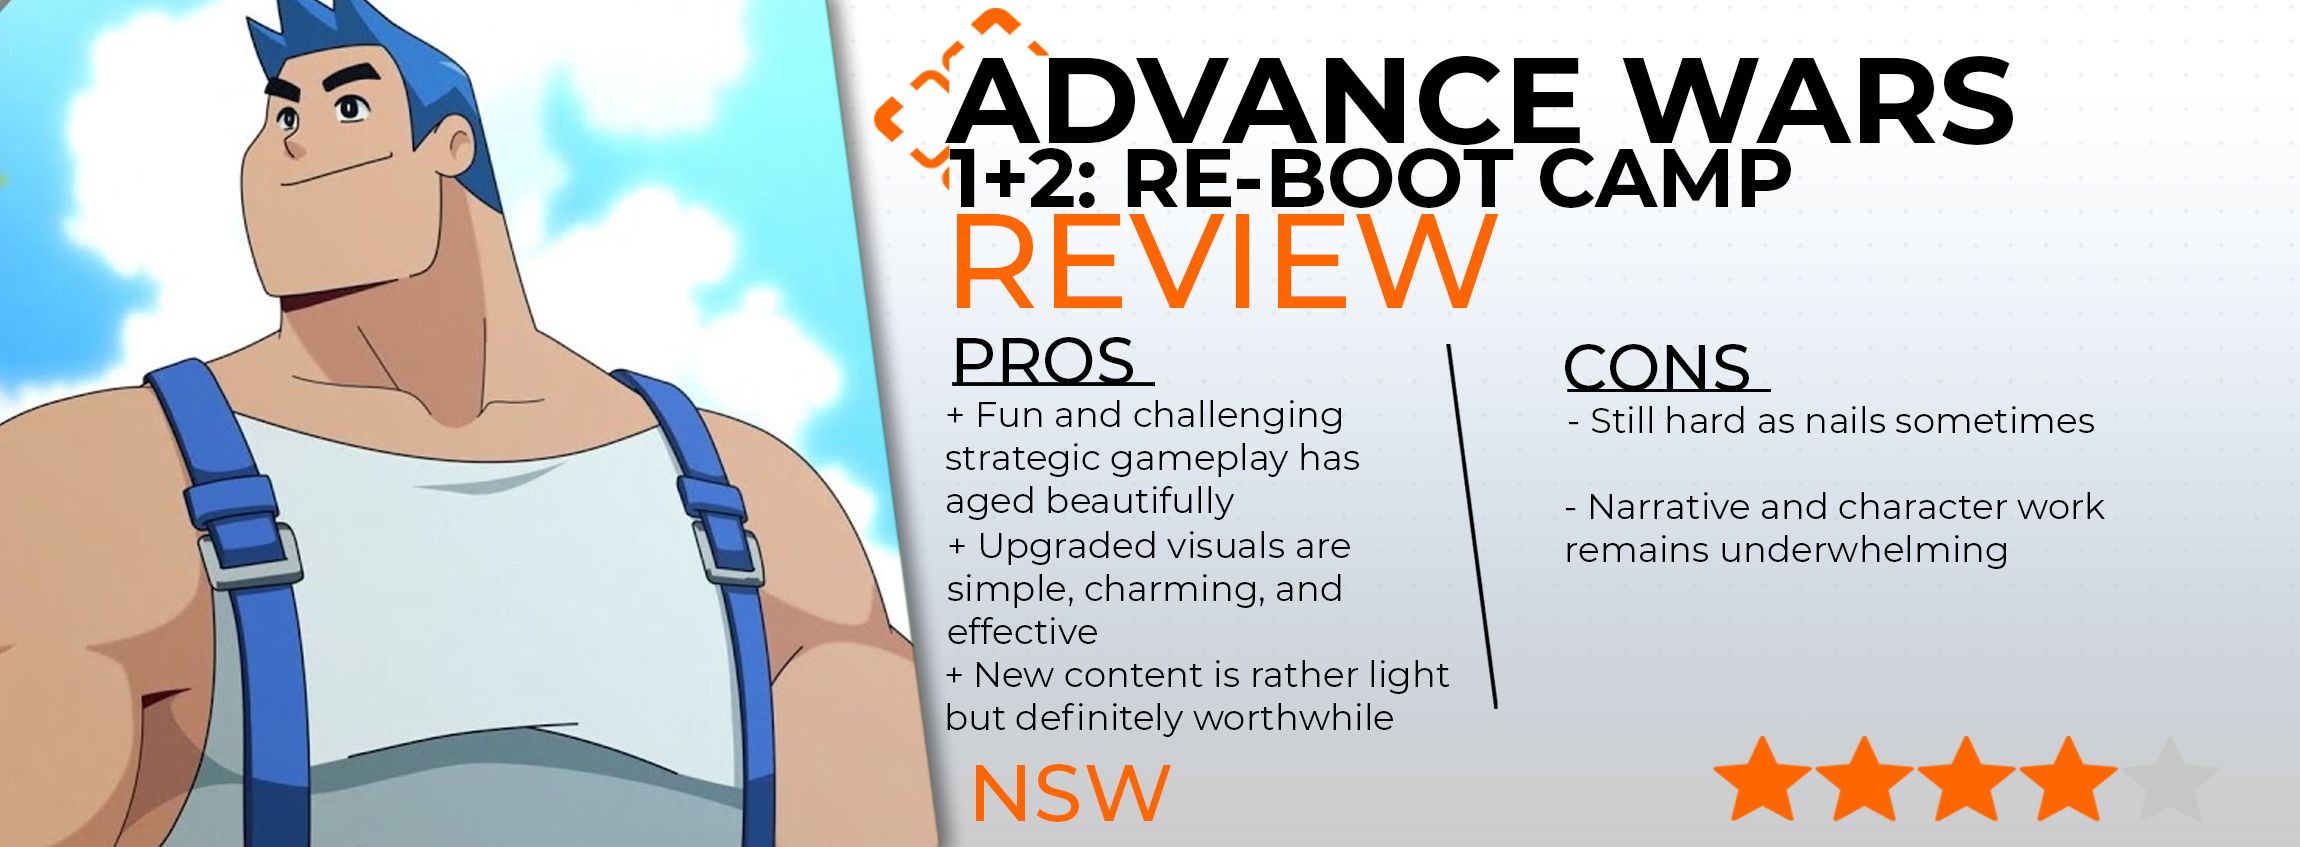 Advance wars review card